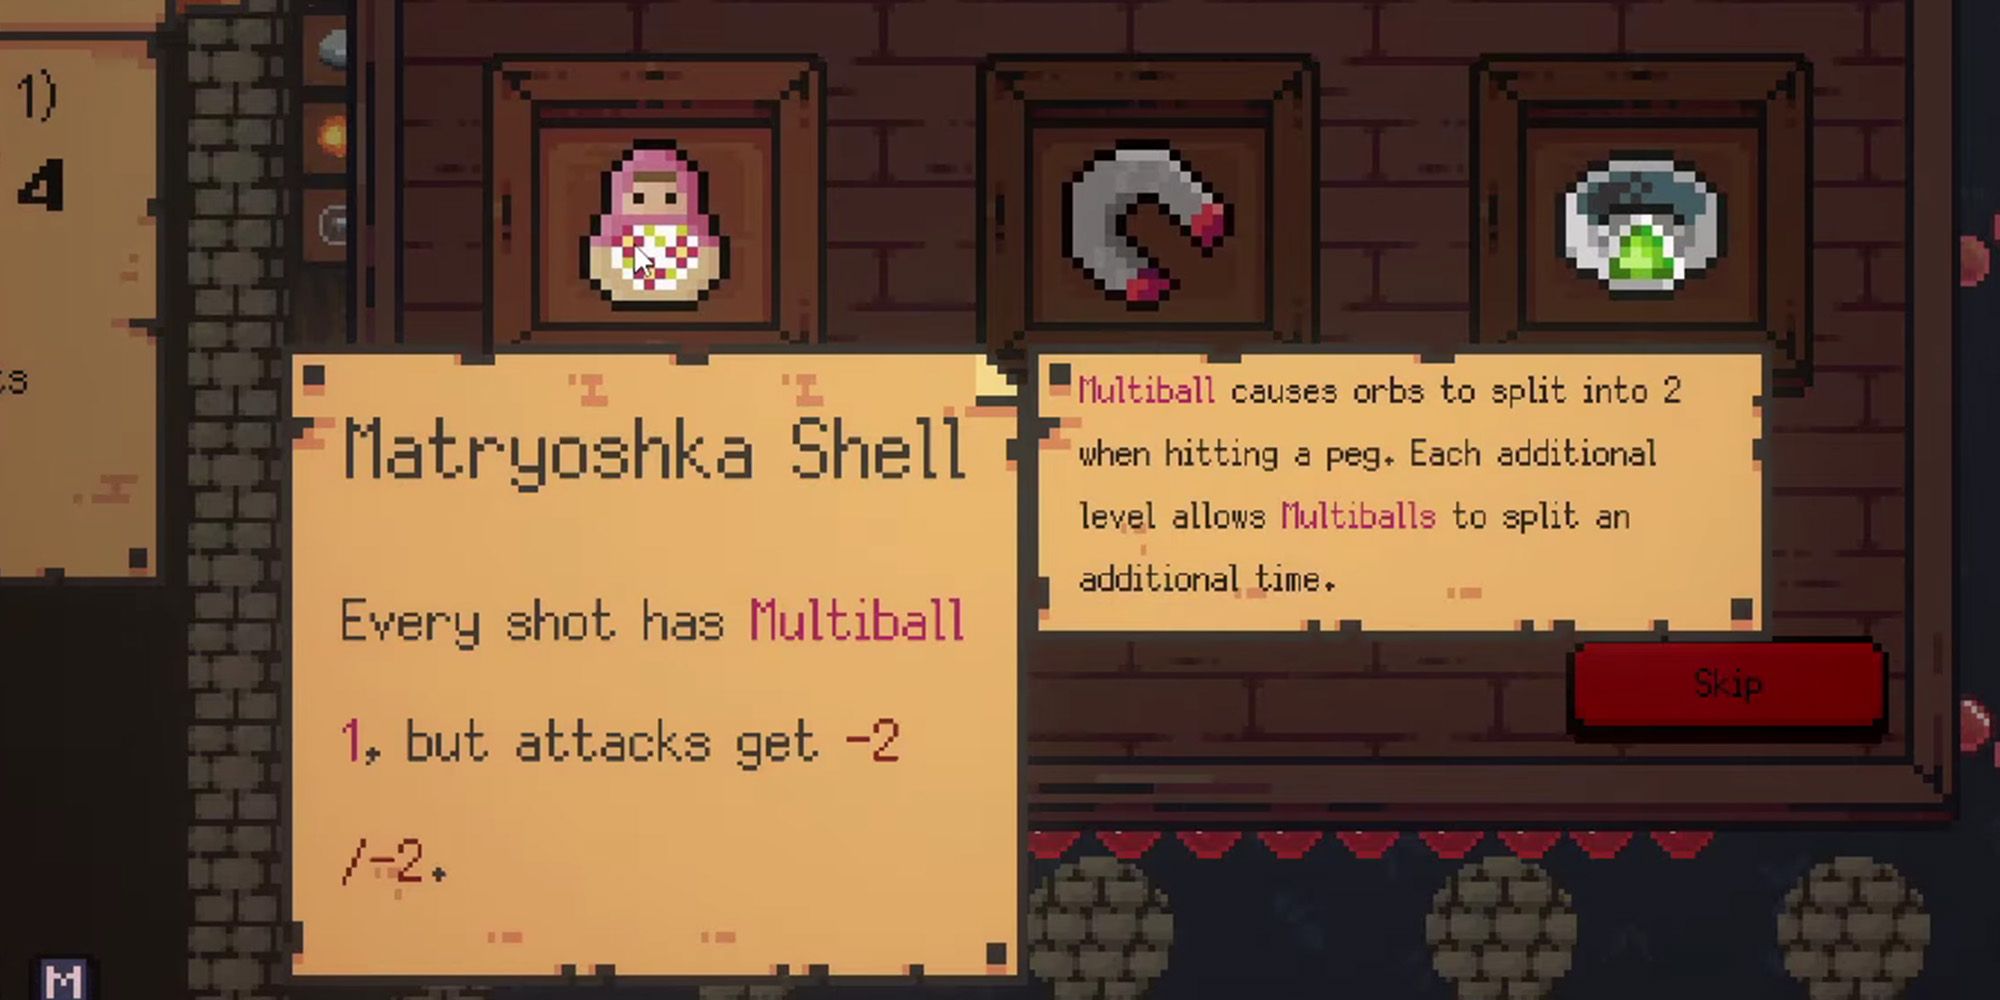 Peglin screenshot of the Matryoshka Shell Relic, which looks like a round doll with a pink head and a wide beige body